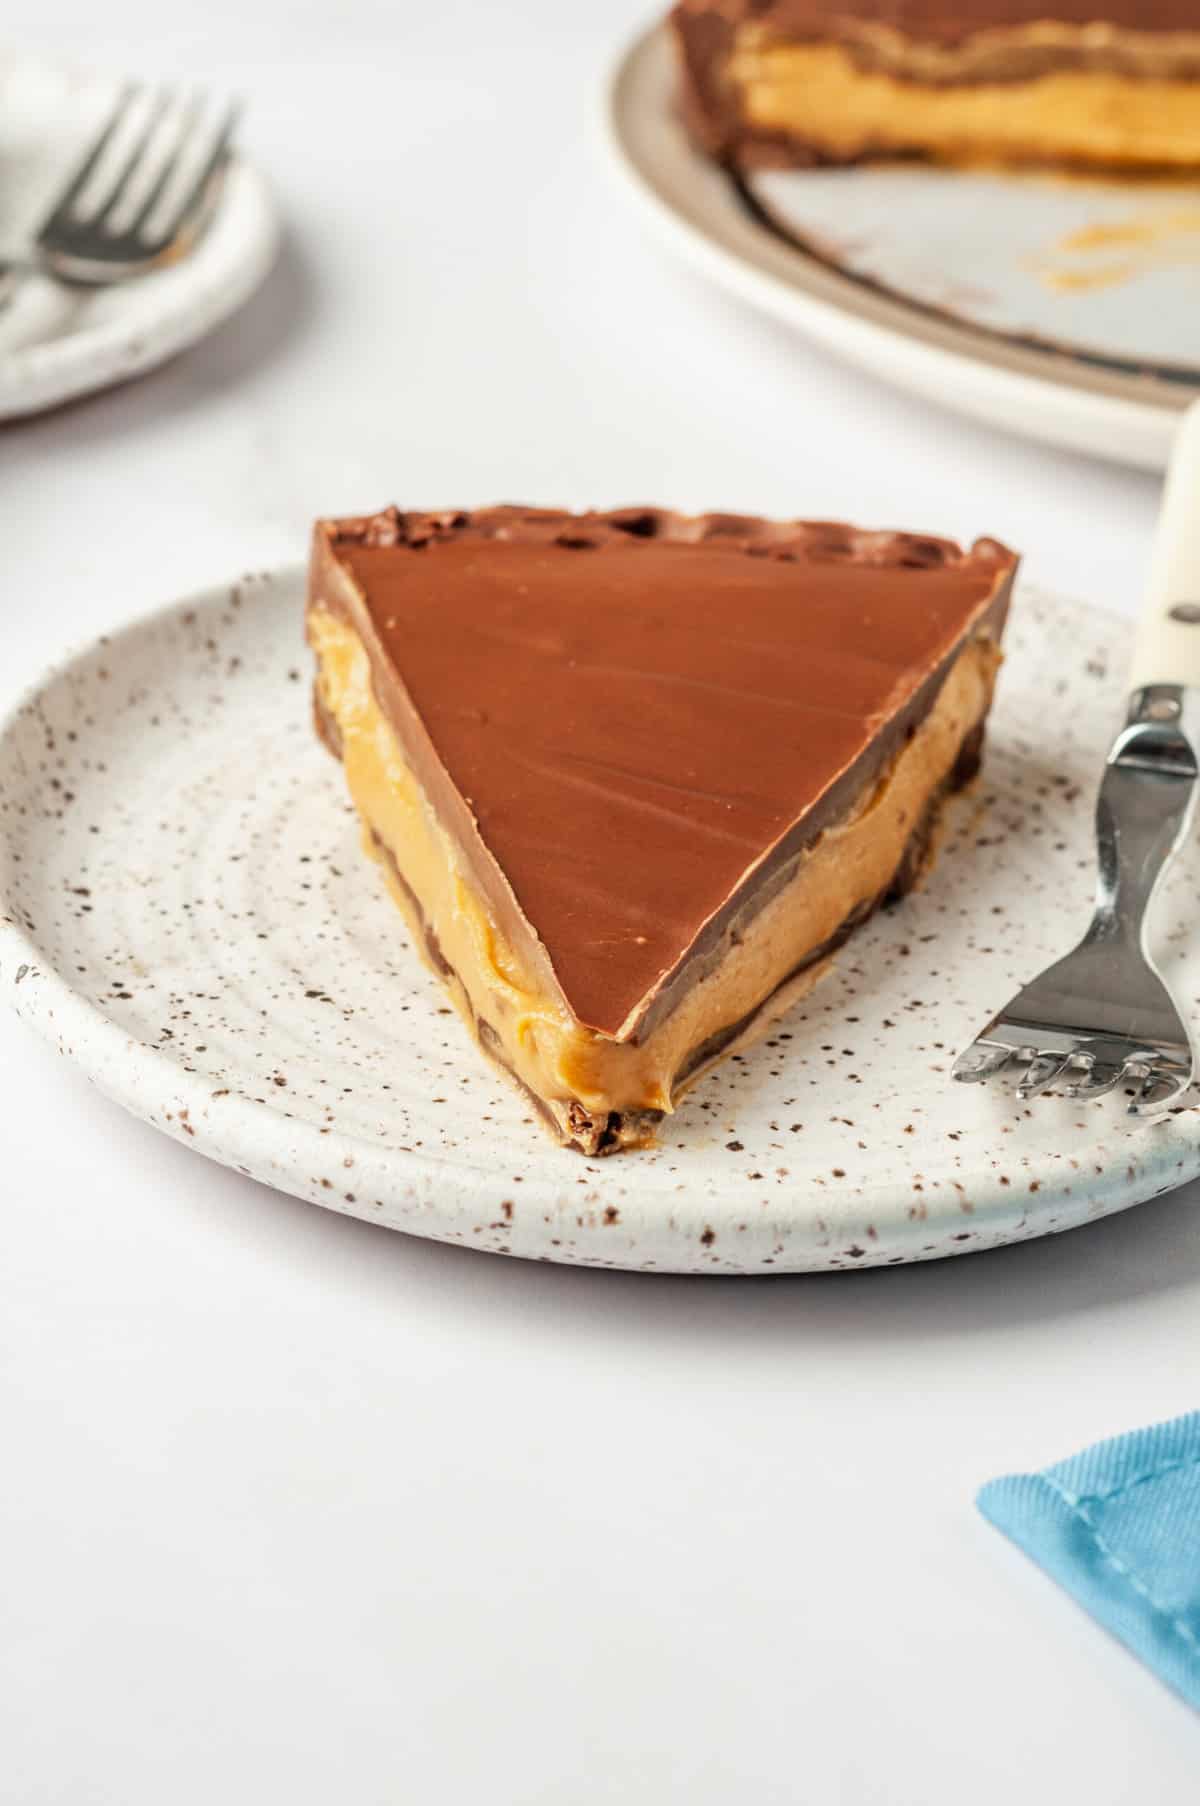 close up image of a slice of Reese's peanut butter cup pie served on a brown speckled plate